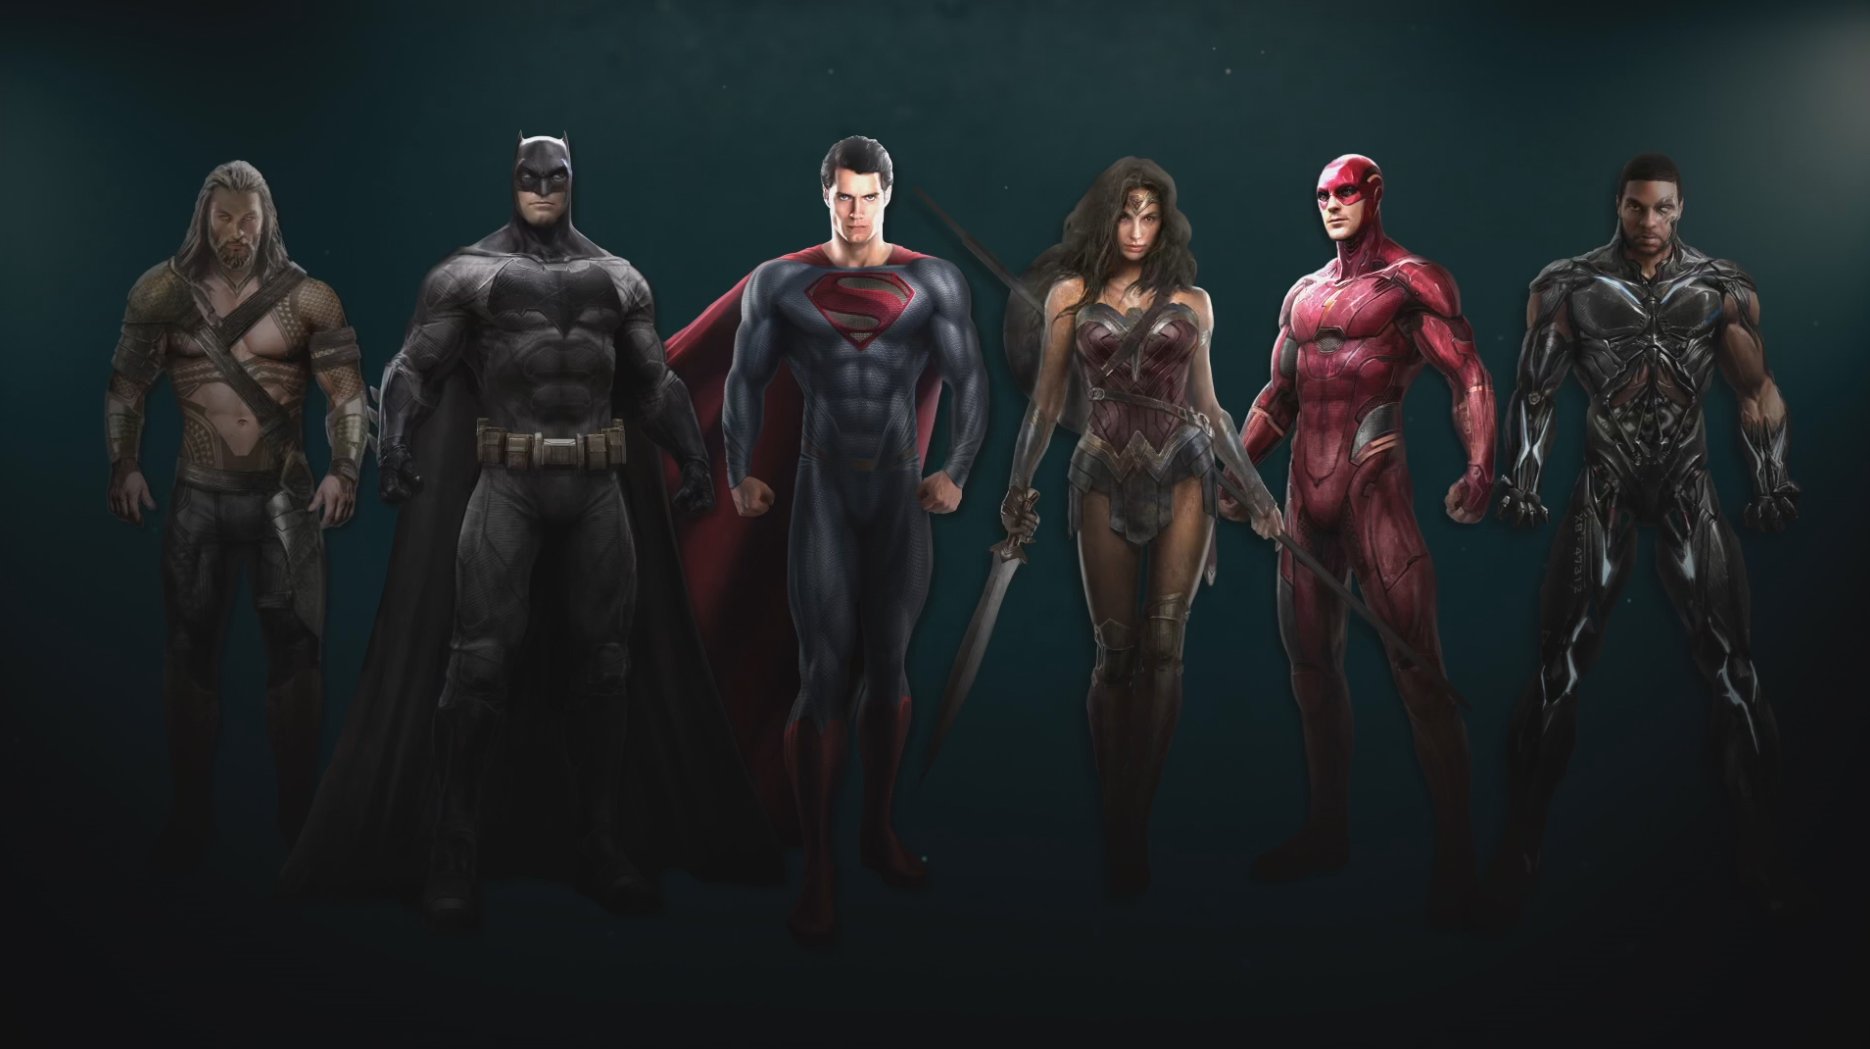 Amazing Justice League Pictures & Backgrounds